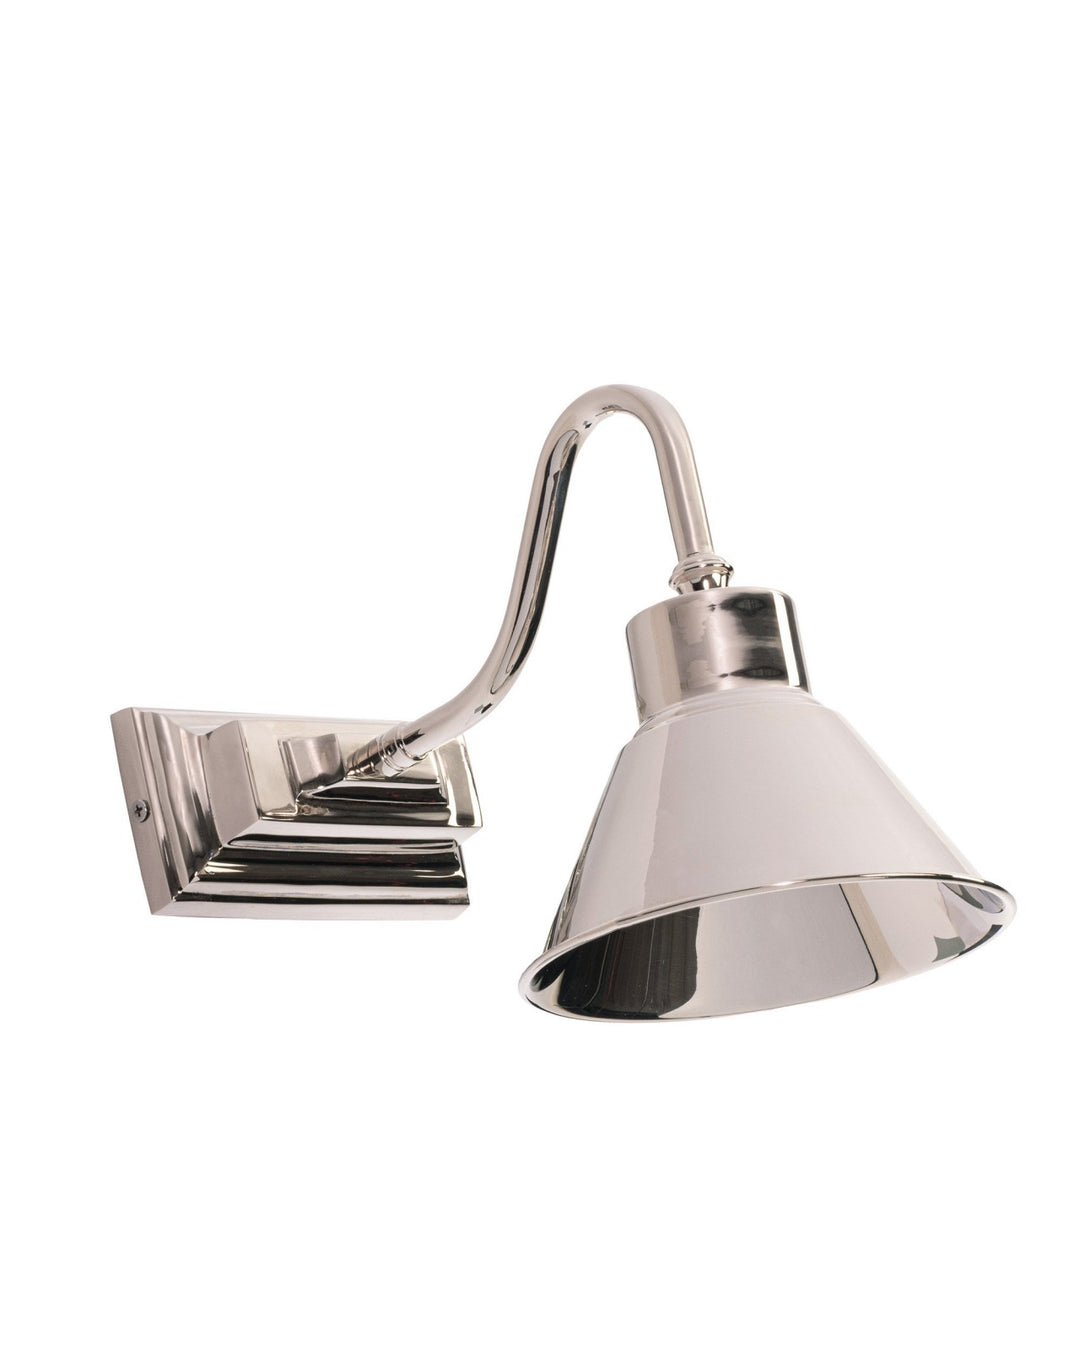 Newport Sconce in Polished Nickel